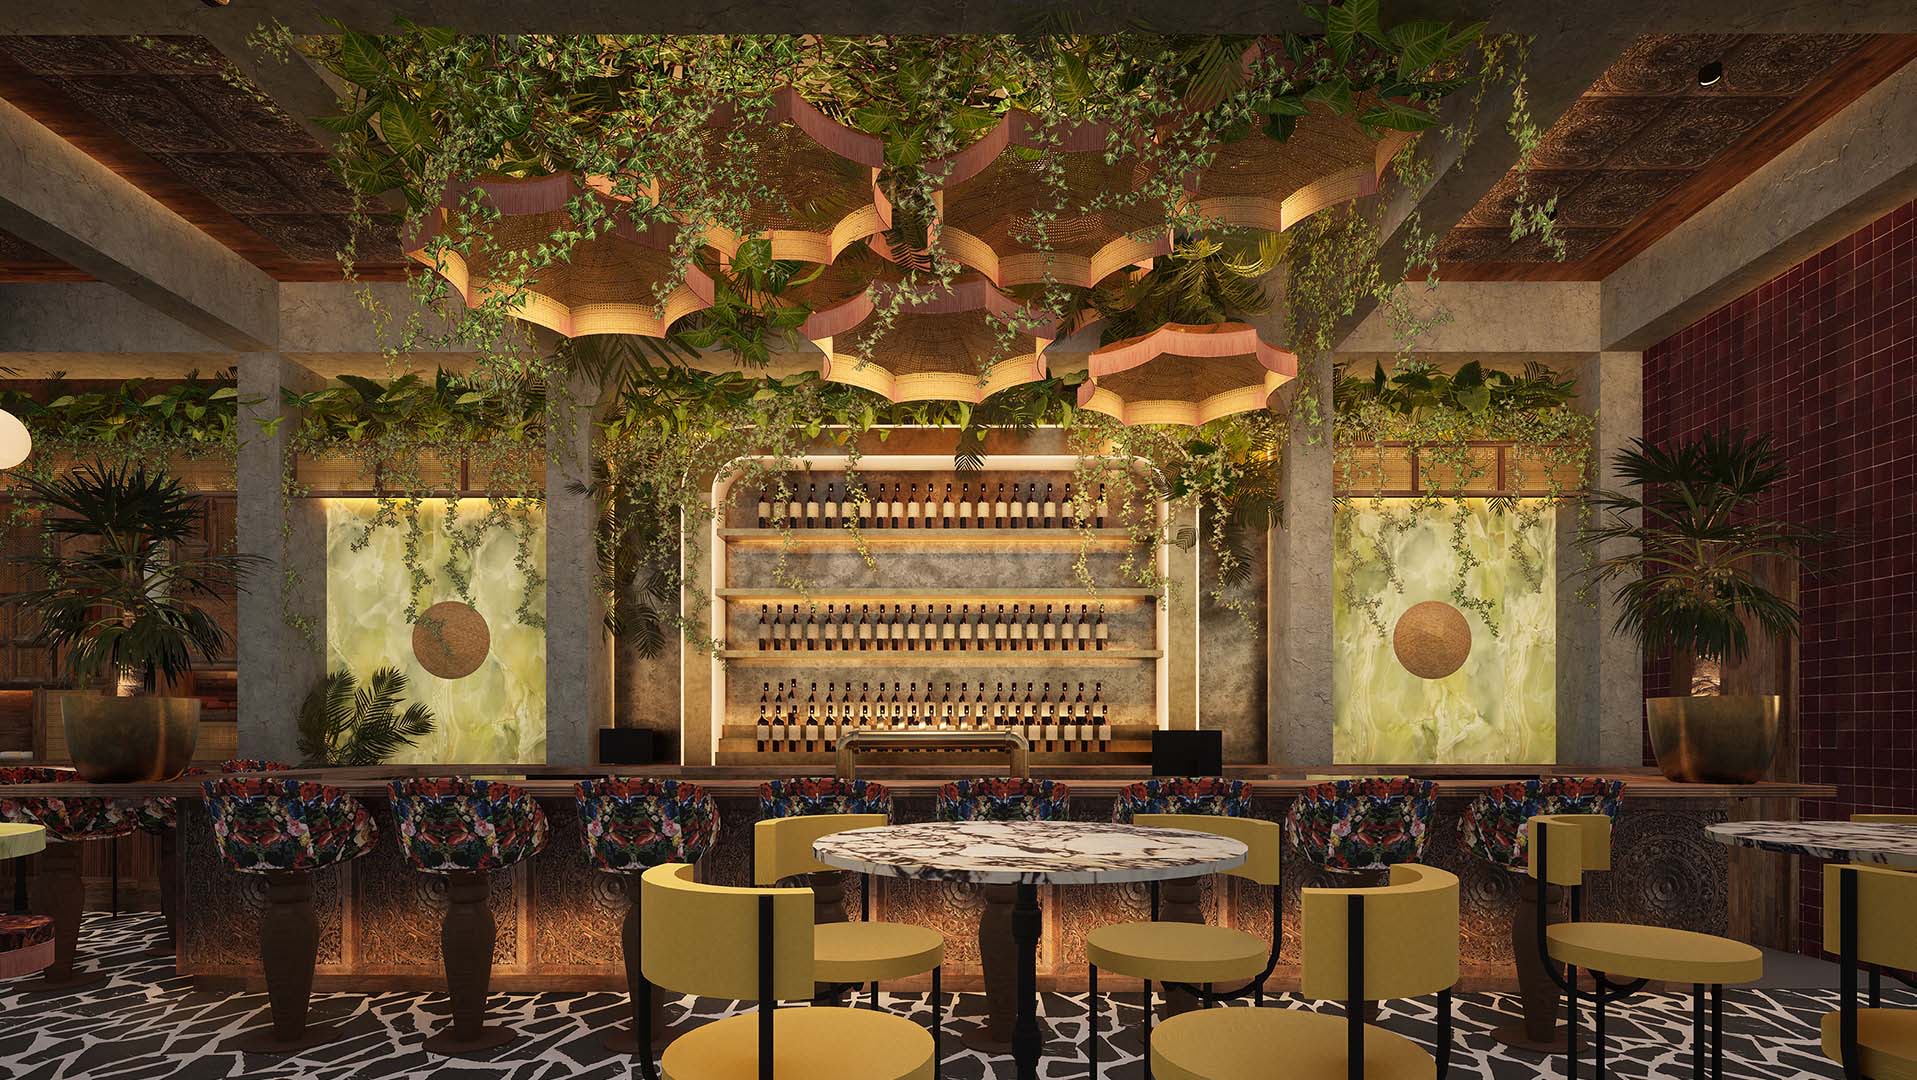 Coming Soon: Luc Lac Is Queens Wharf's New Indochine-Inspired Restaurant and Bar From the Crew Behind Donna Chang